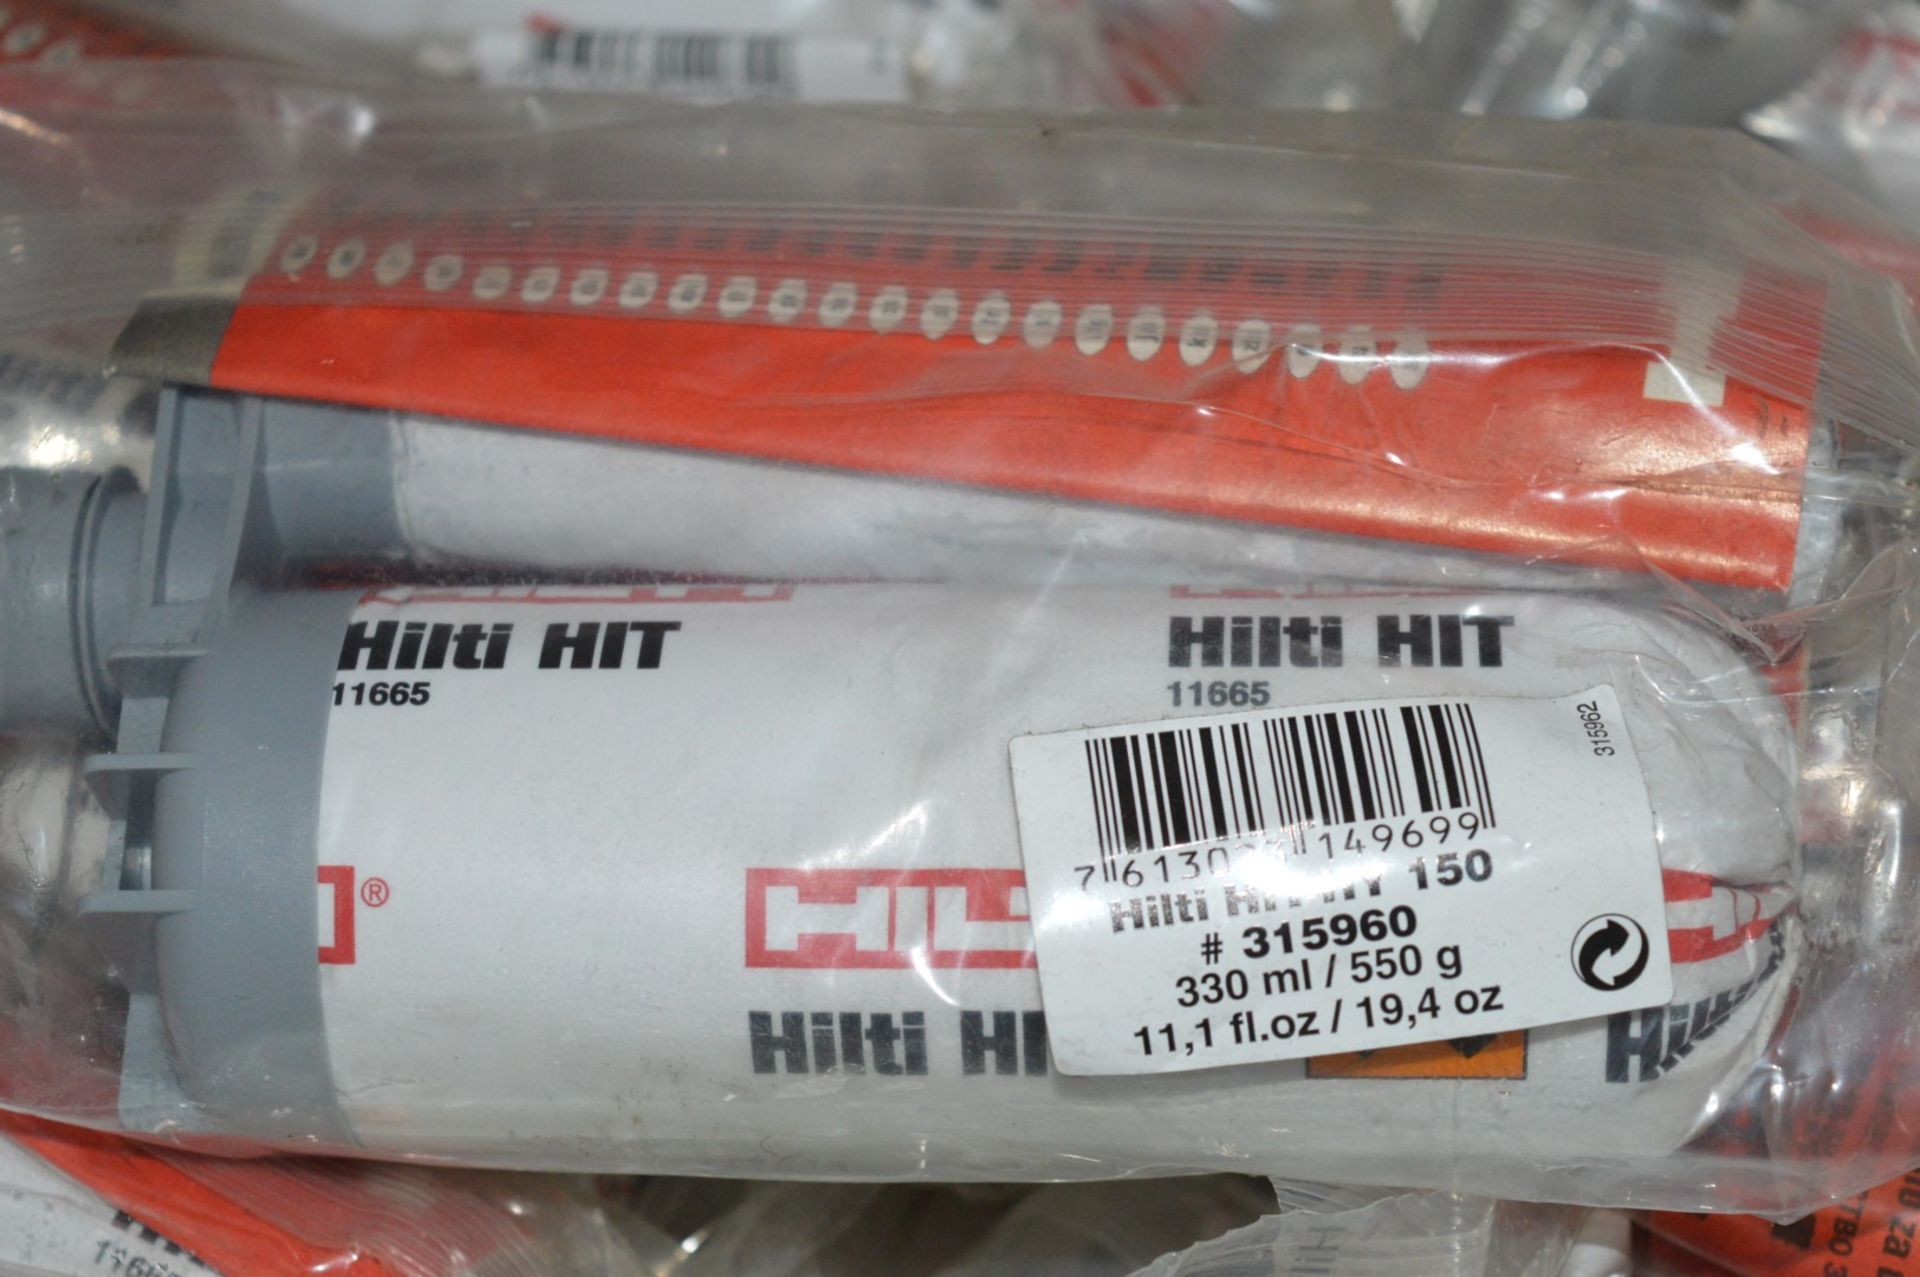 15 x Hilti HIT-HY 150 Adhesive Anchor - 330ml - Product Code 315960 - Unused Packs - CL300 - Ref - Image 3 of 4